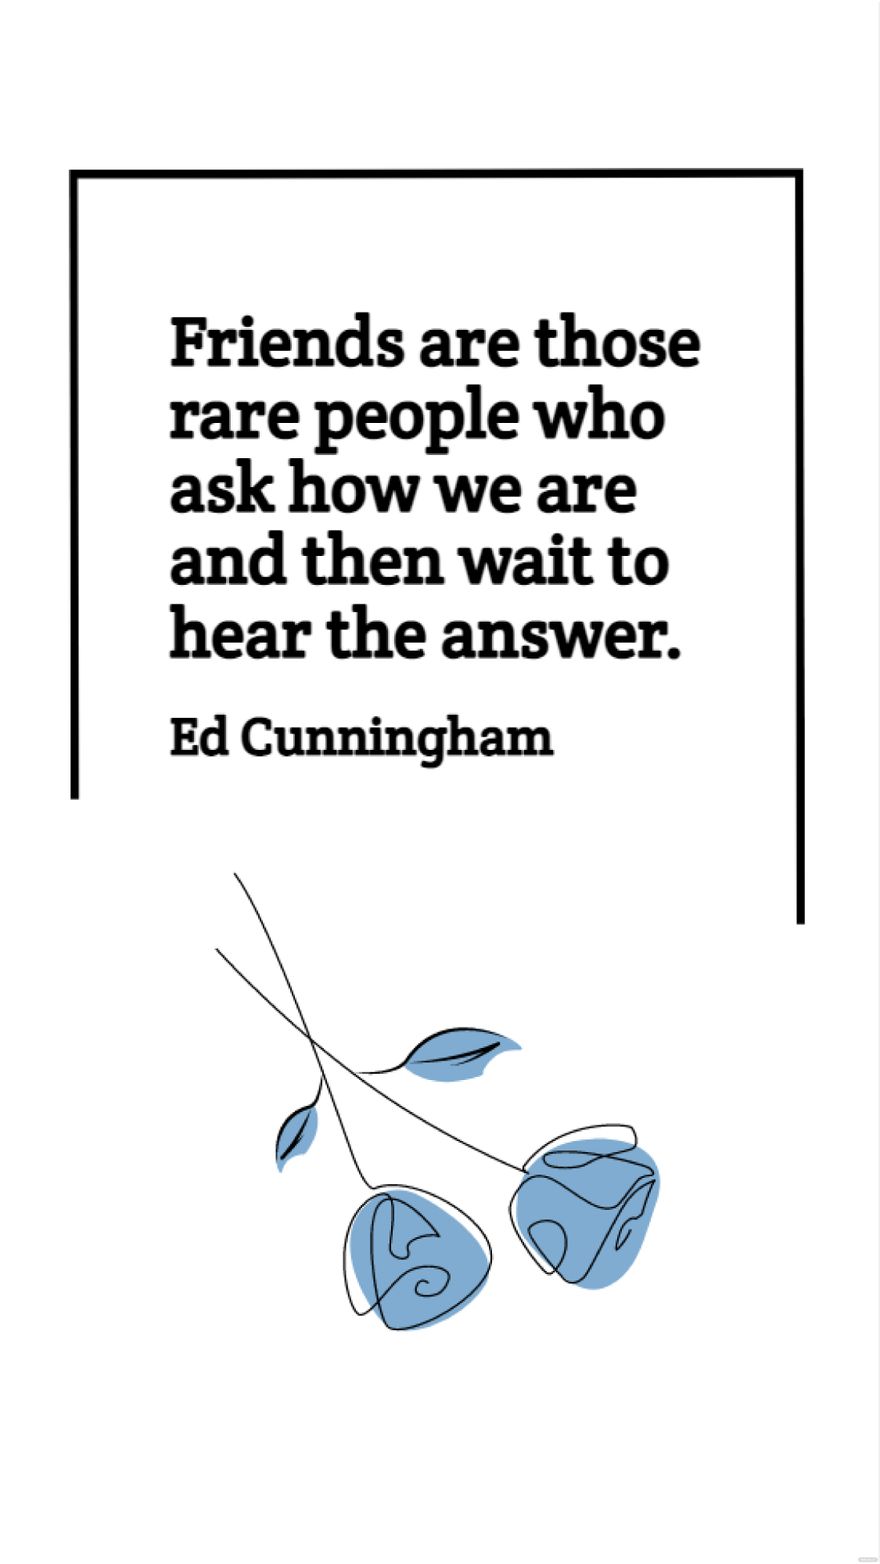 Ed Cunningham - Friends are those rare people who ask how we are and then wait to hear the answer. in JPG